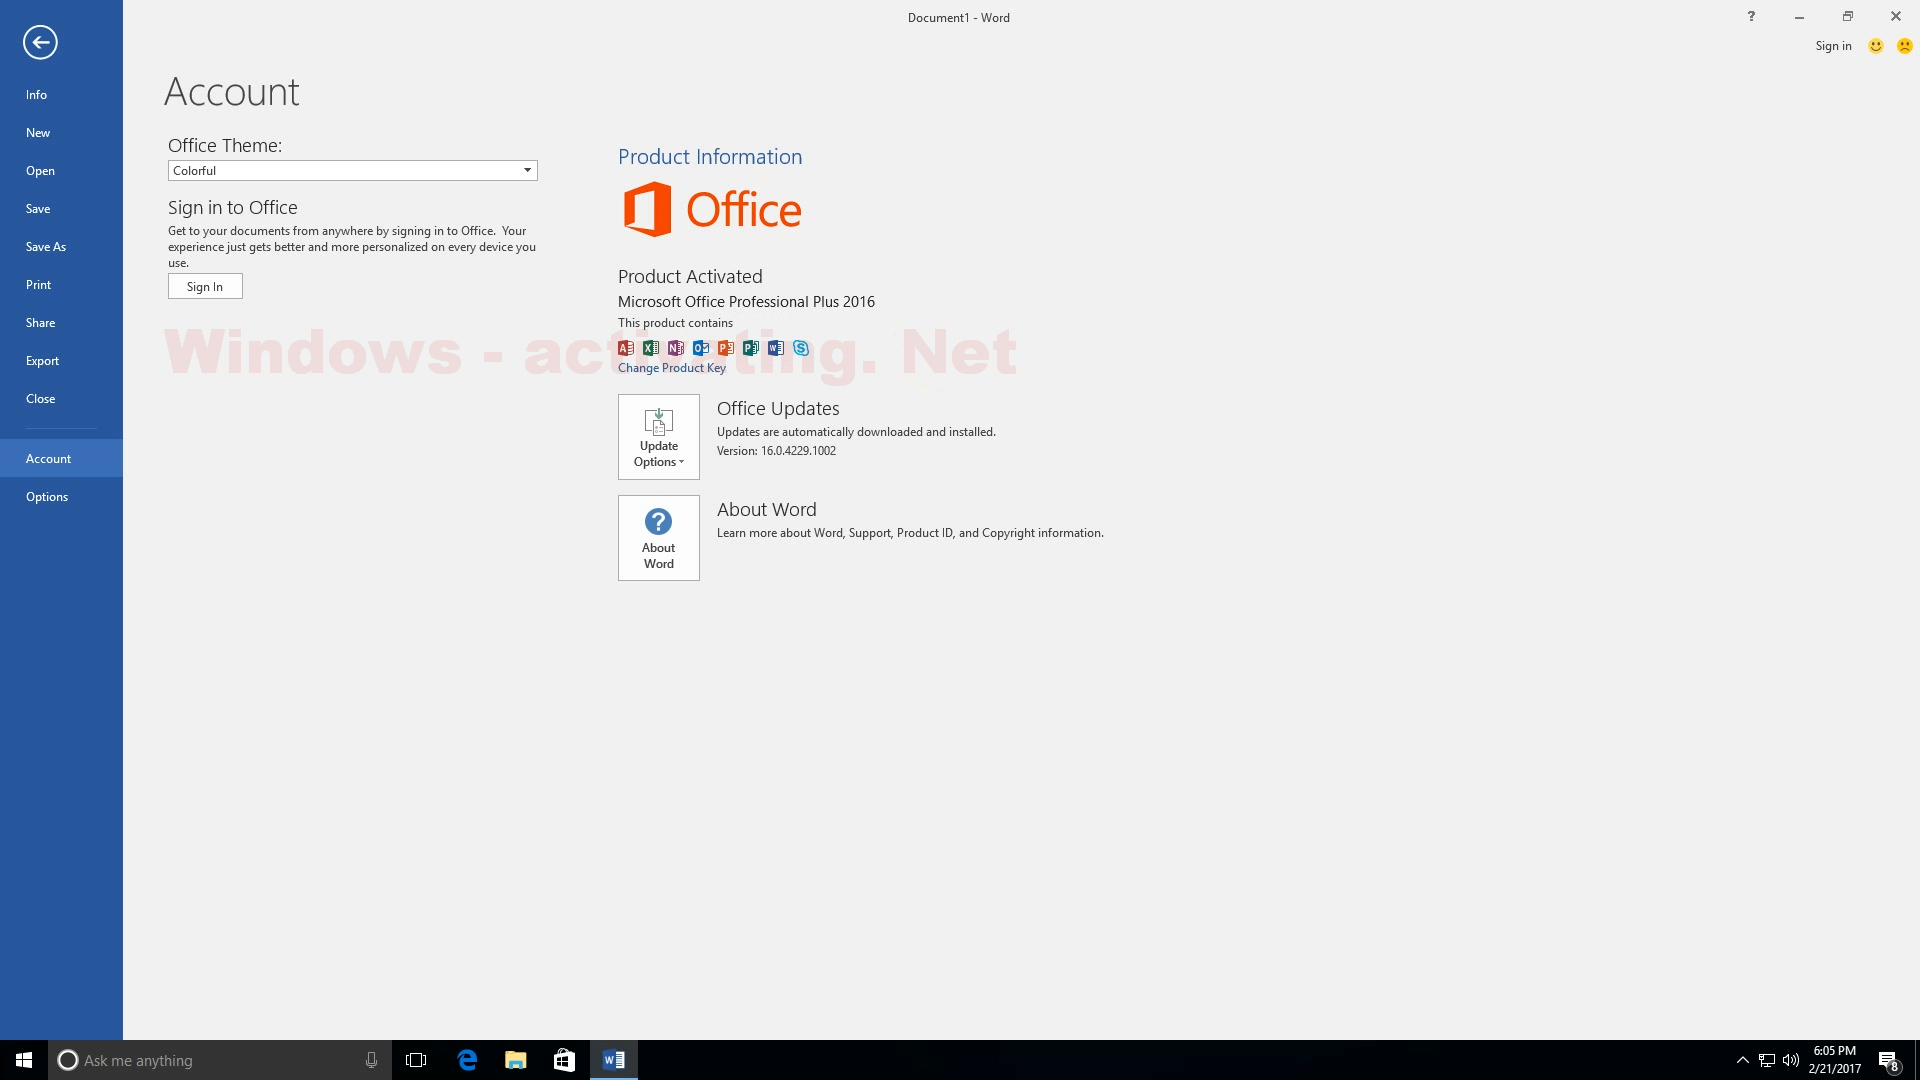 activate office 2016 windows 8.1